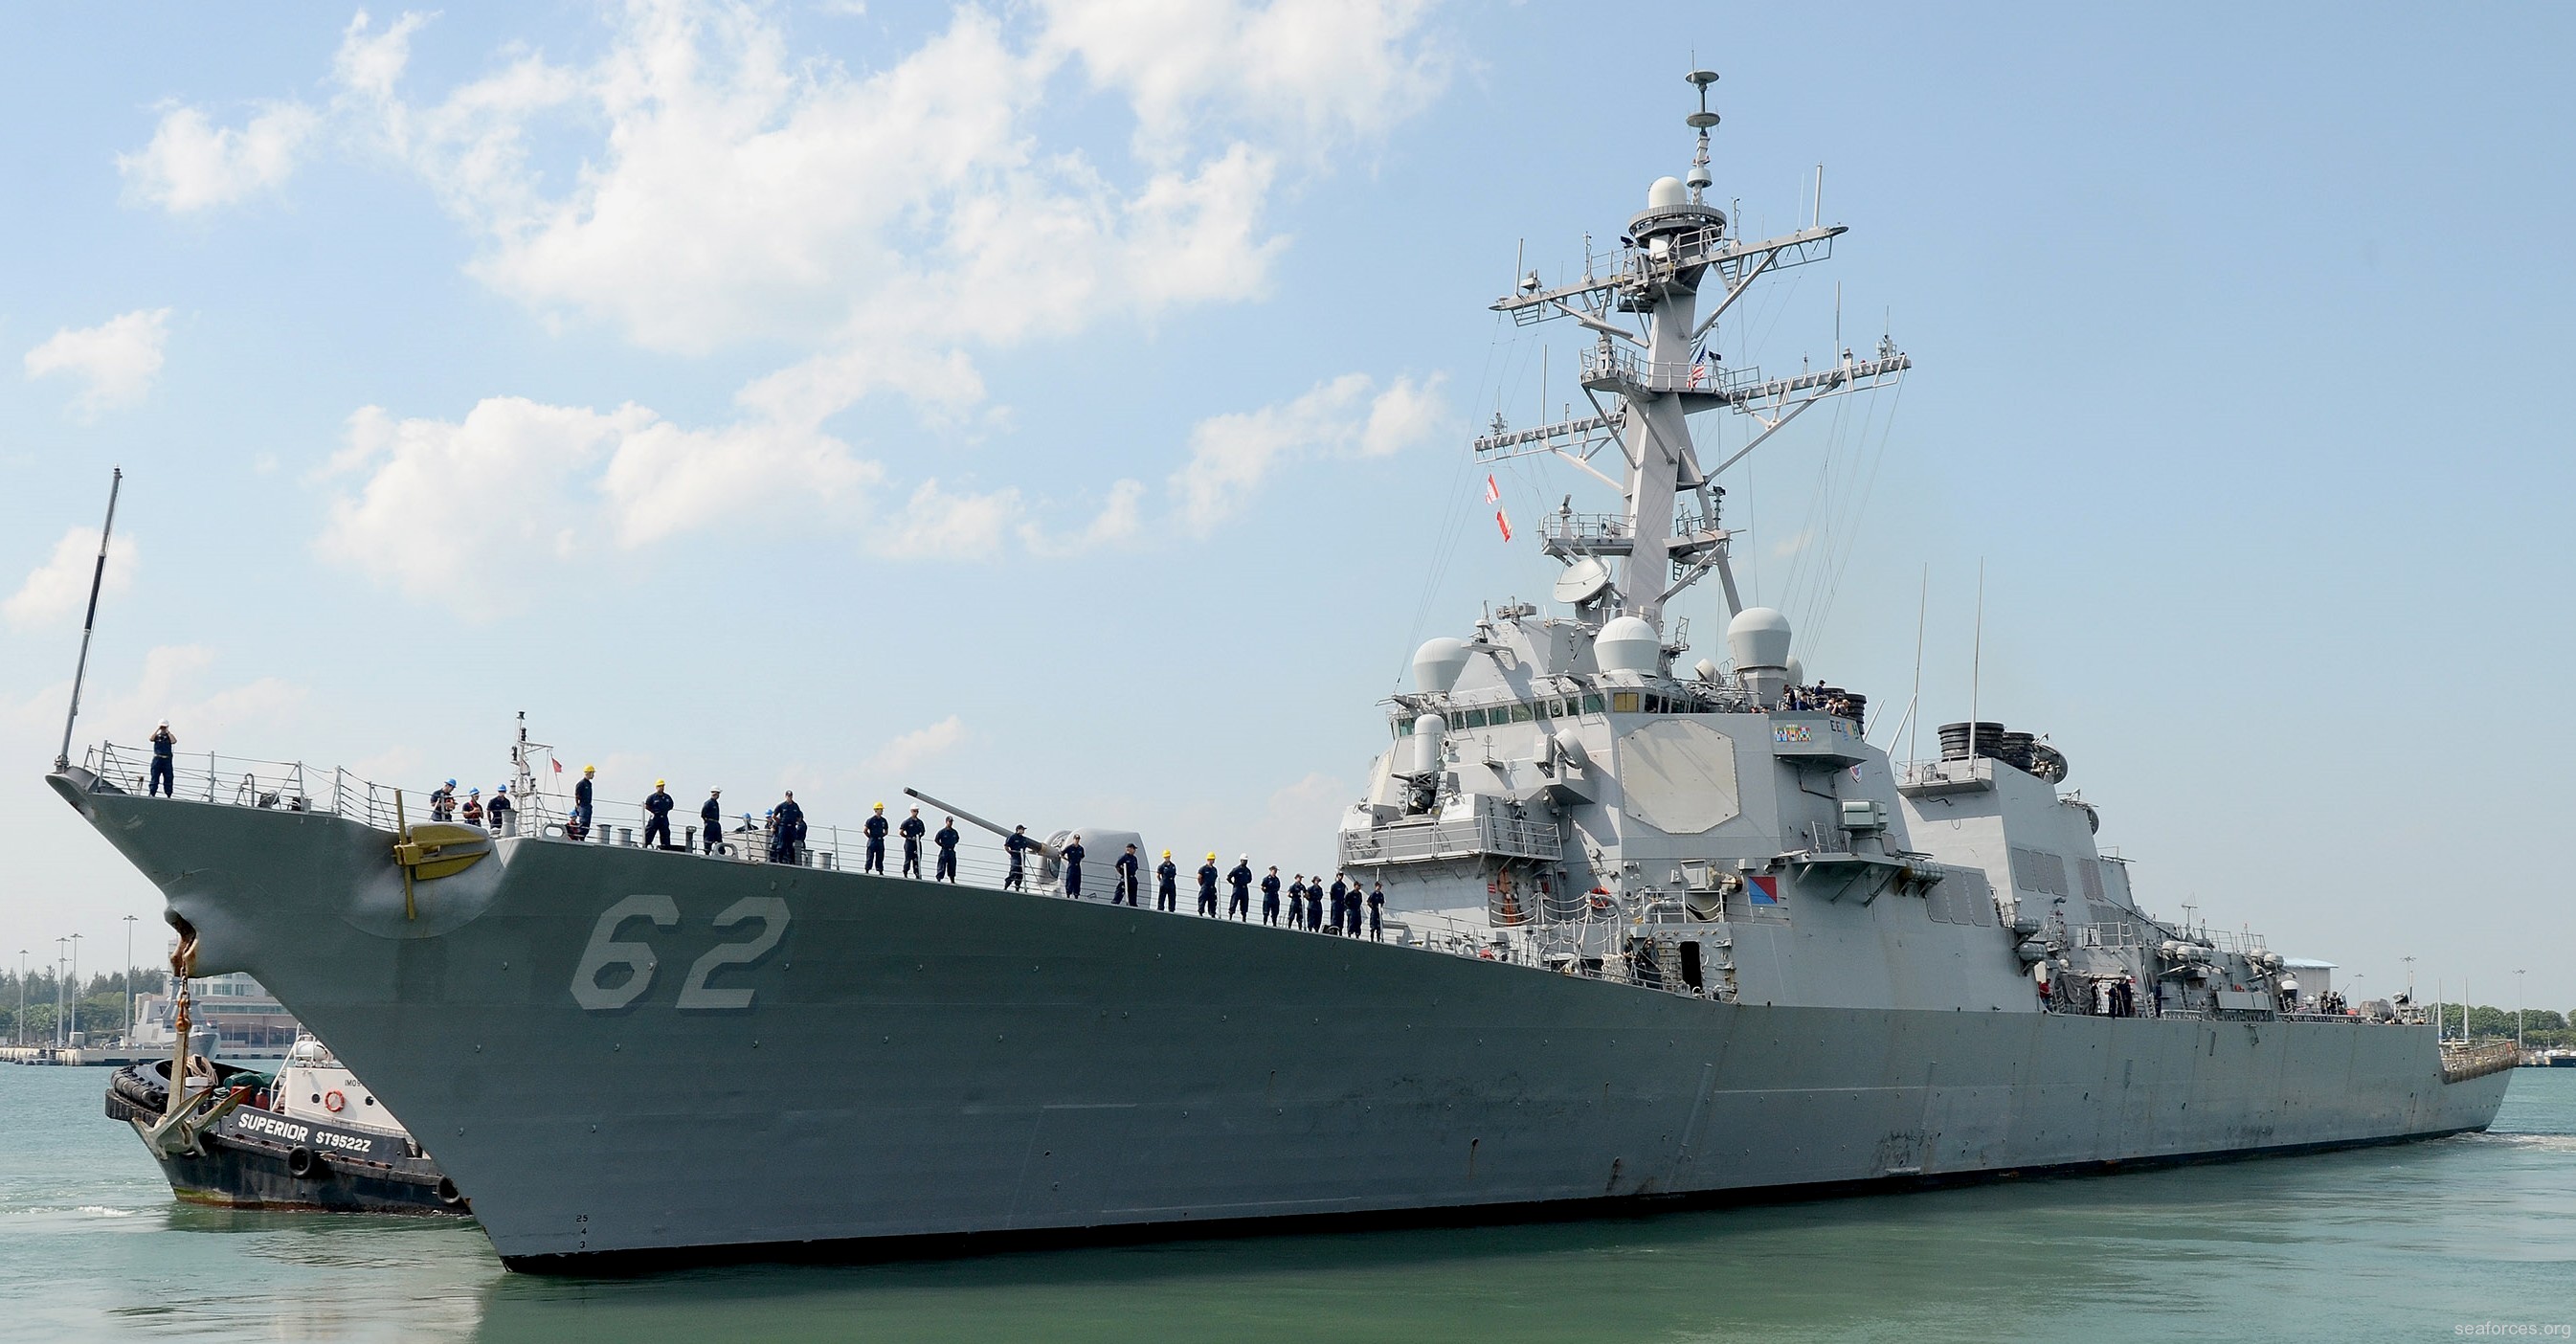 ddg-62 uss fitzgerald guided missile destroyer 2013 44 changi naval base singapore